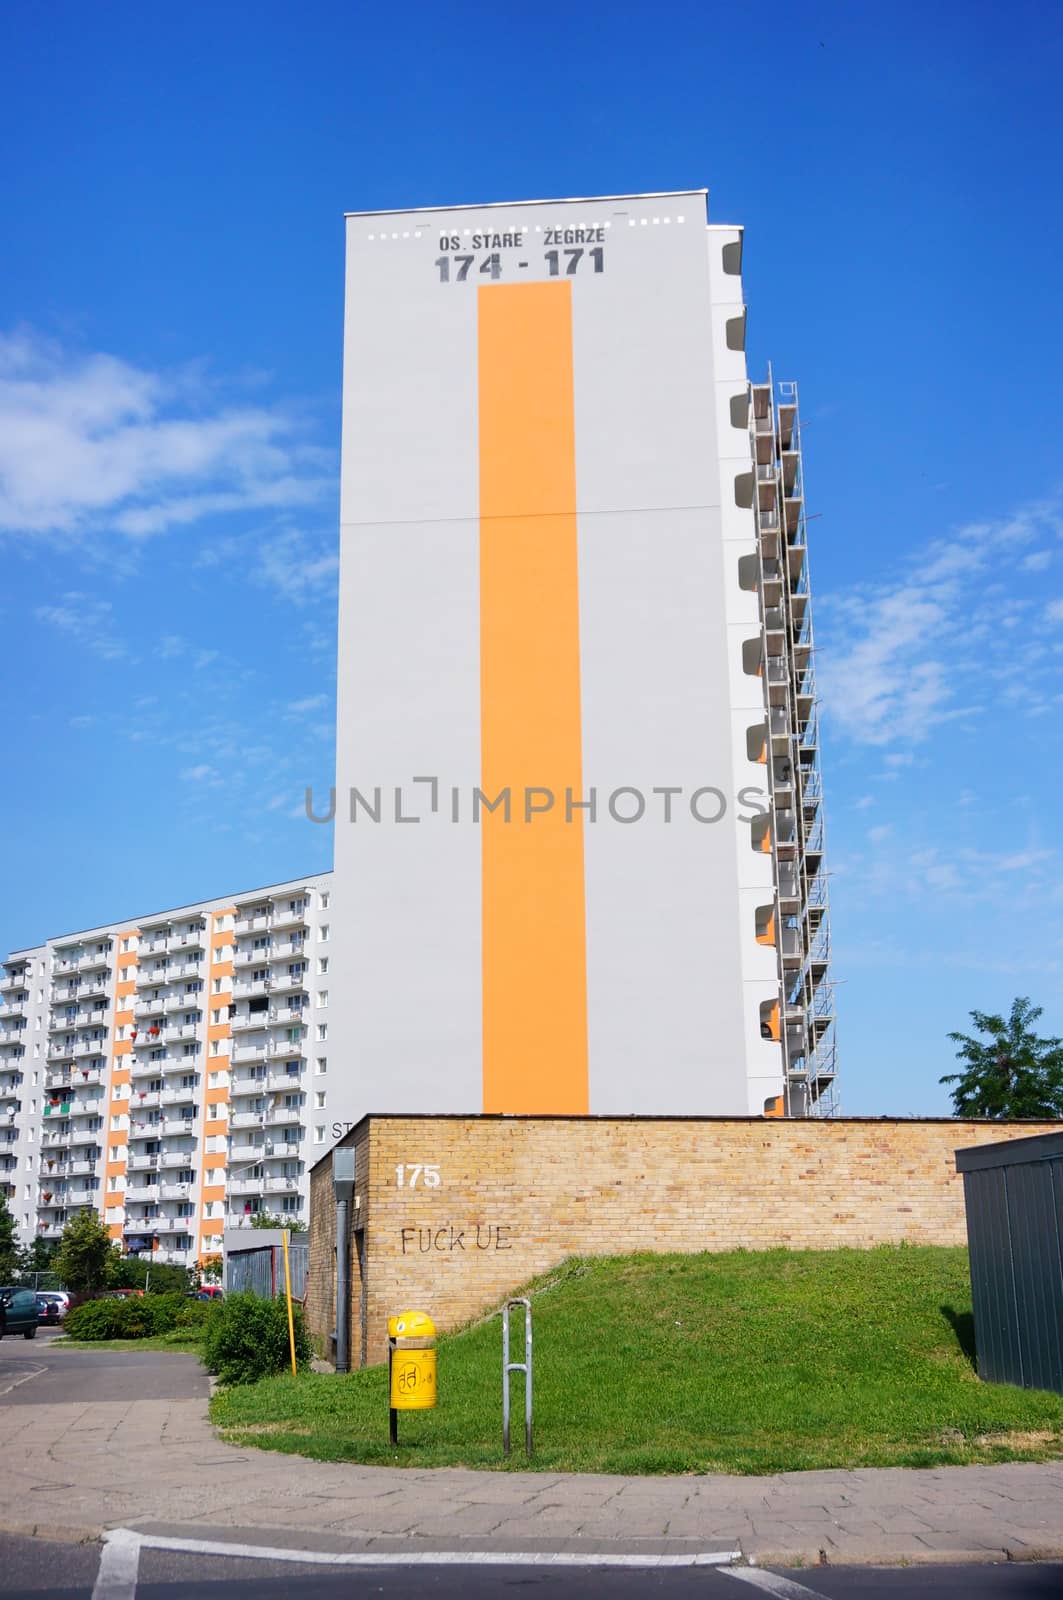 POZNAN, POLAND - AUGUST 08, 2015: High apartment block at the Stare Zegrze area